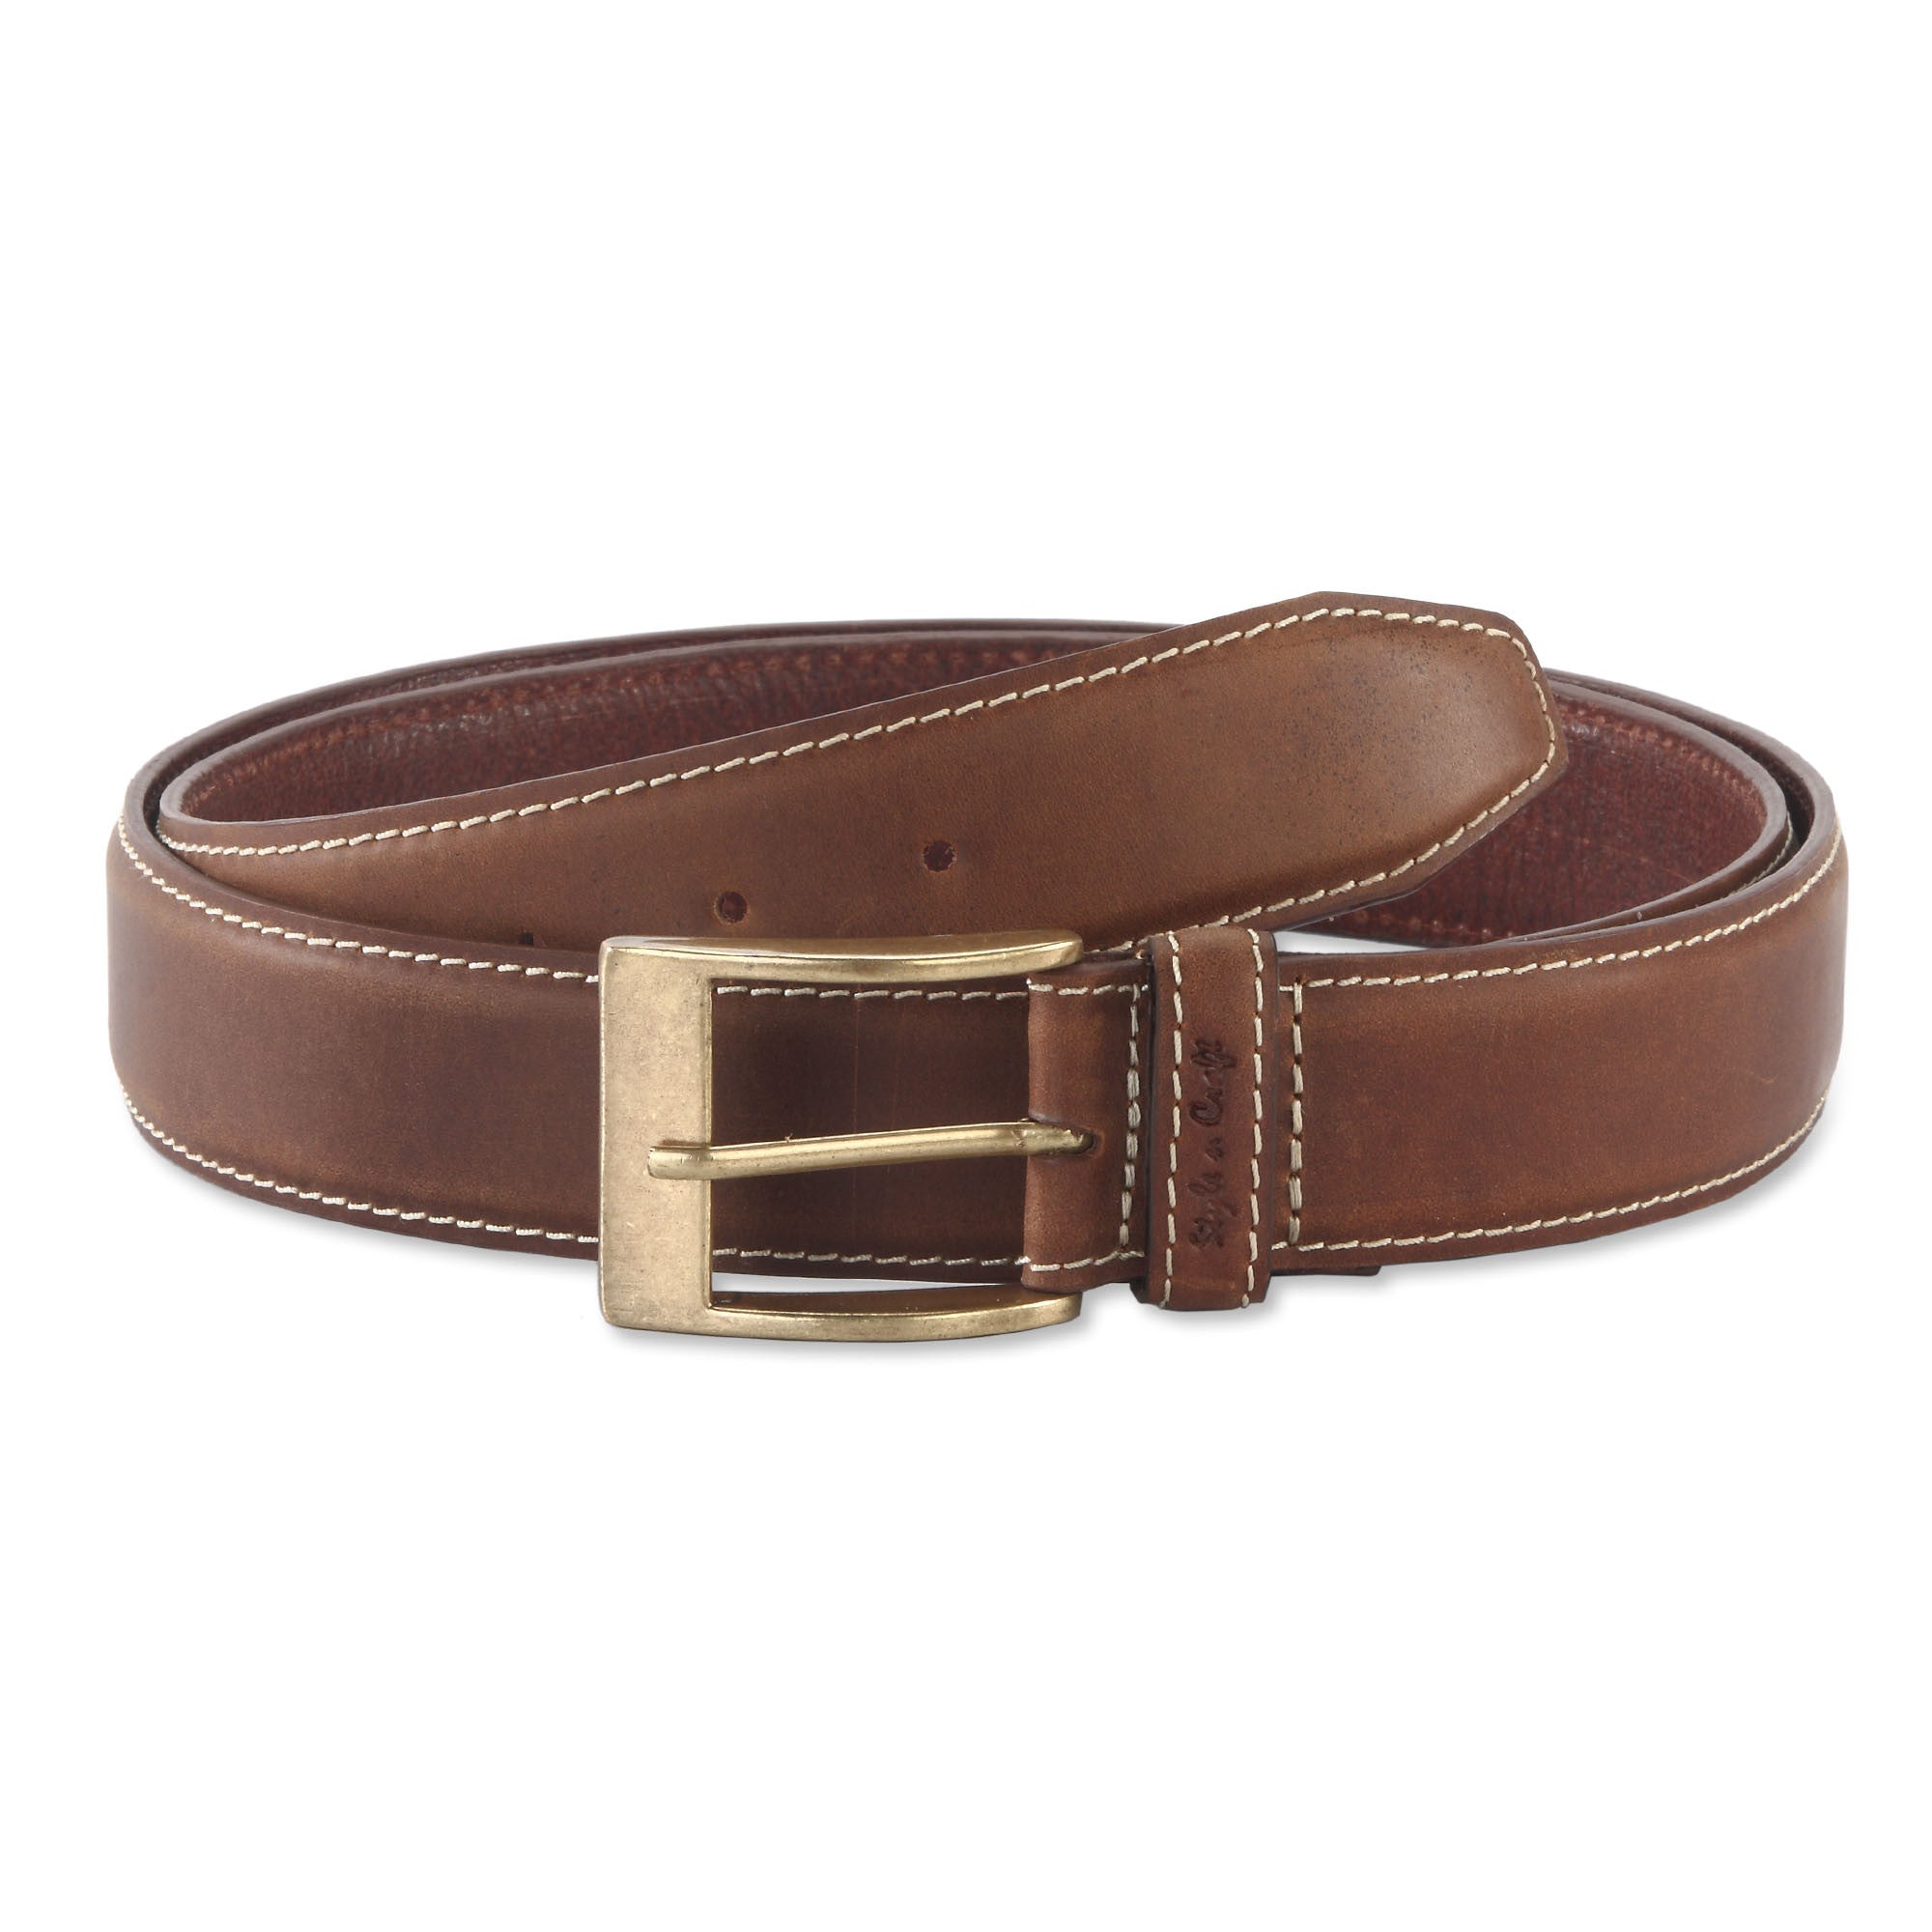 Formal & Casual Leather Belts | Handmade Leather Belts | Style n Craft